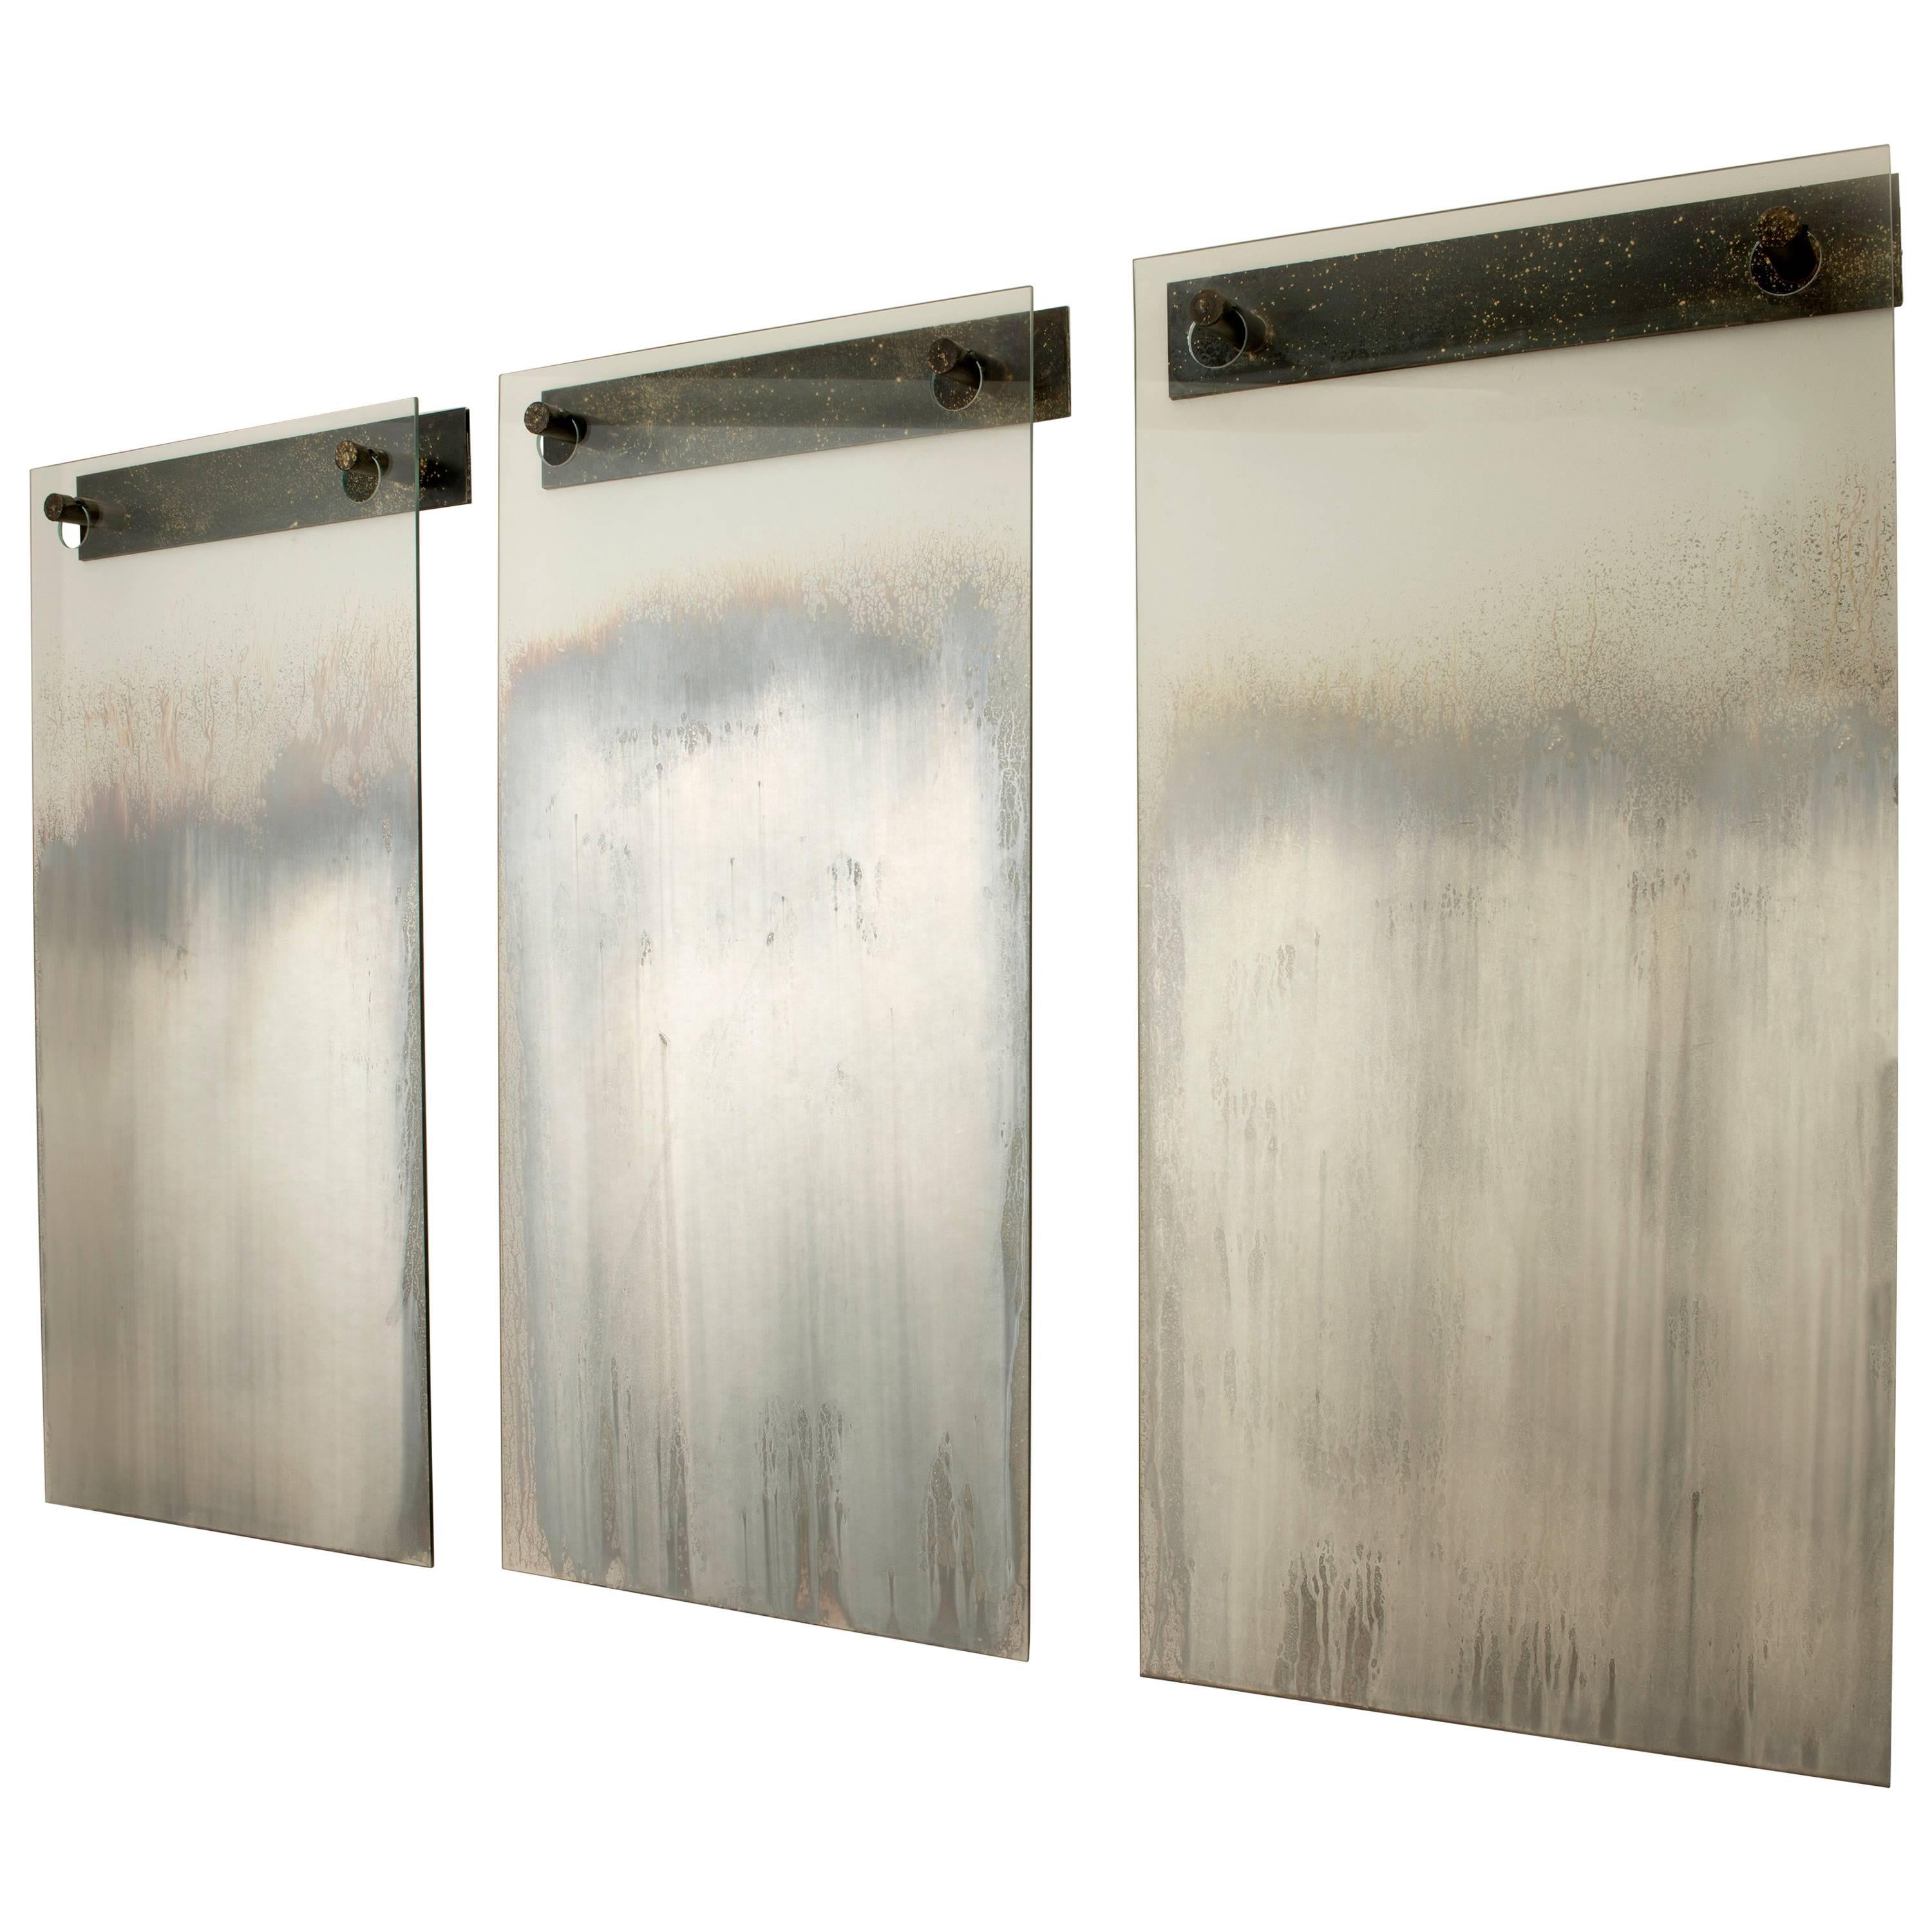 Triptych of Three Contemporary Suspended Fading Wall Mirrors by Gregory Nangle